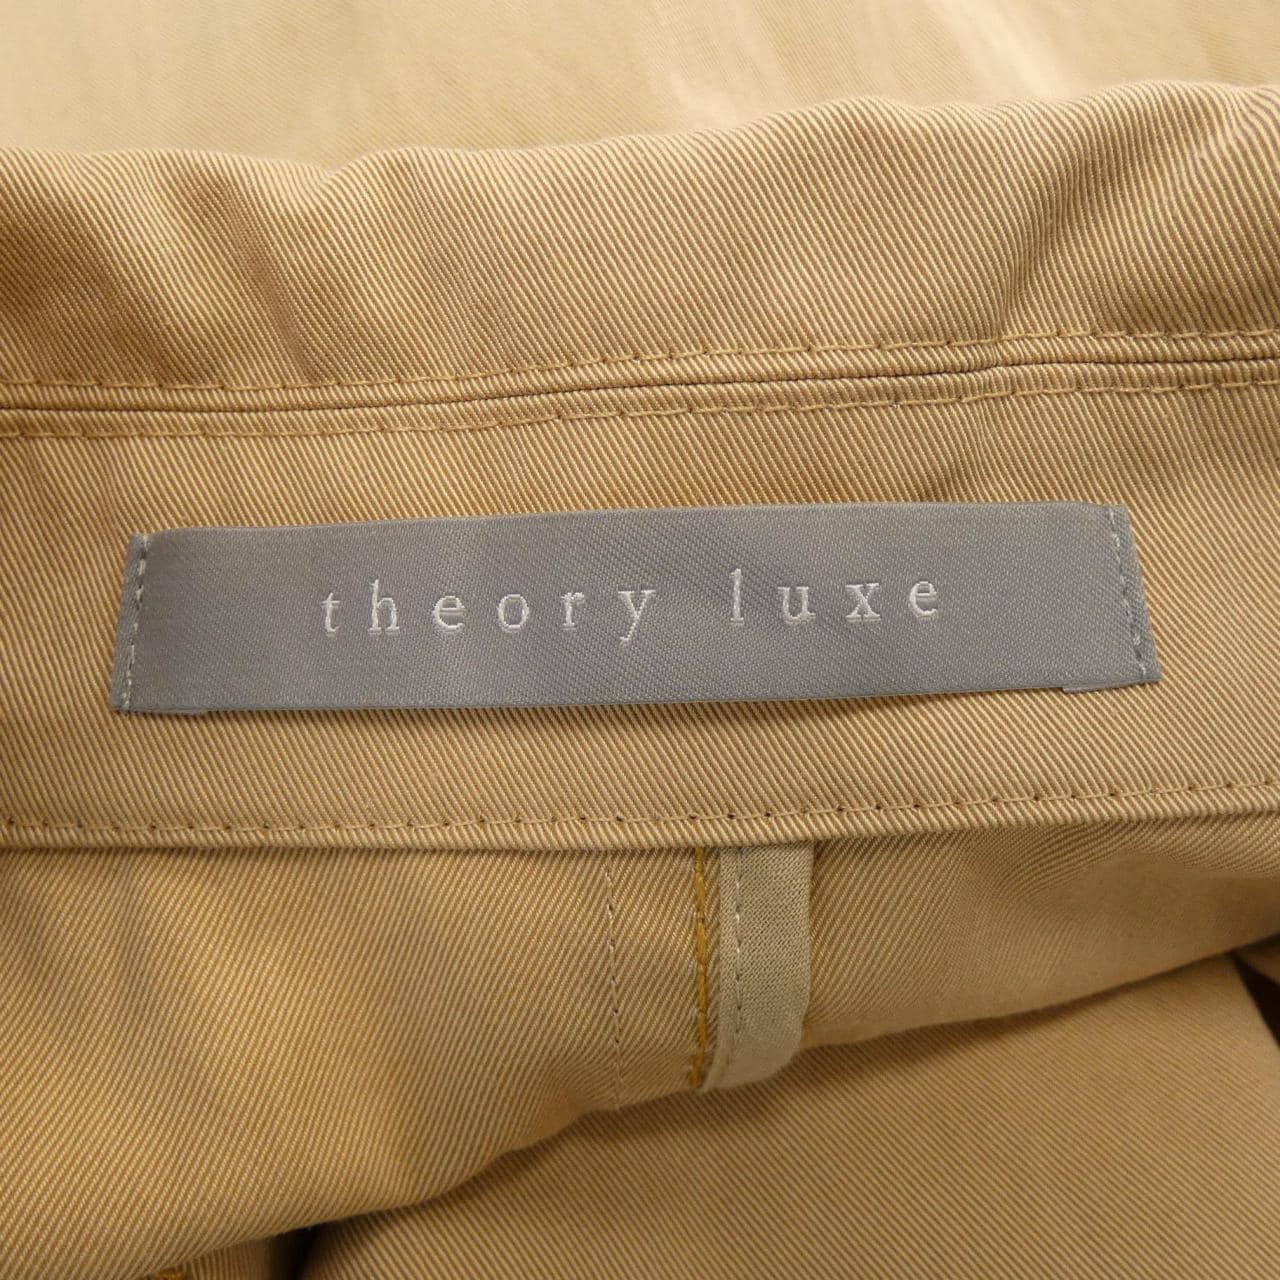 Theory luxe coat